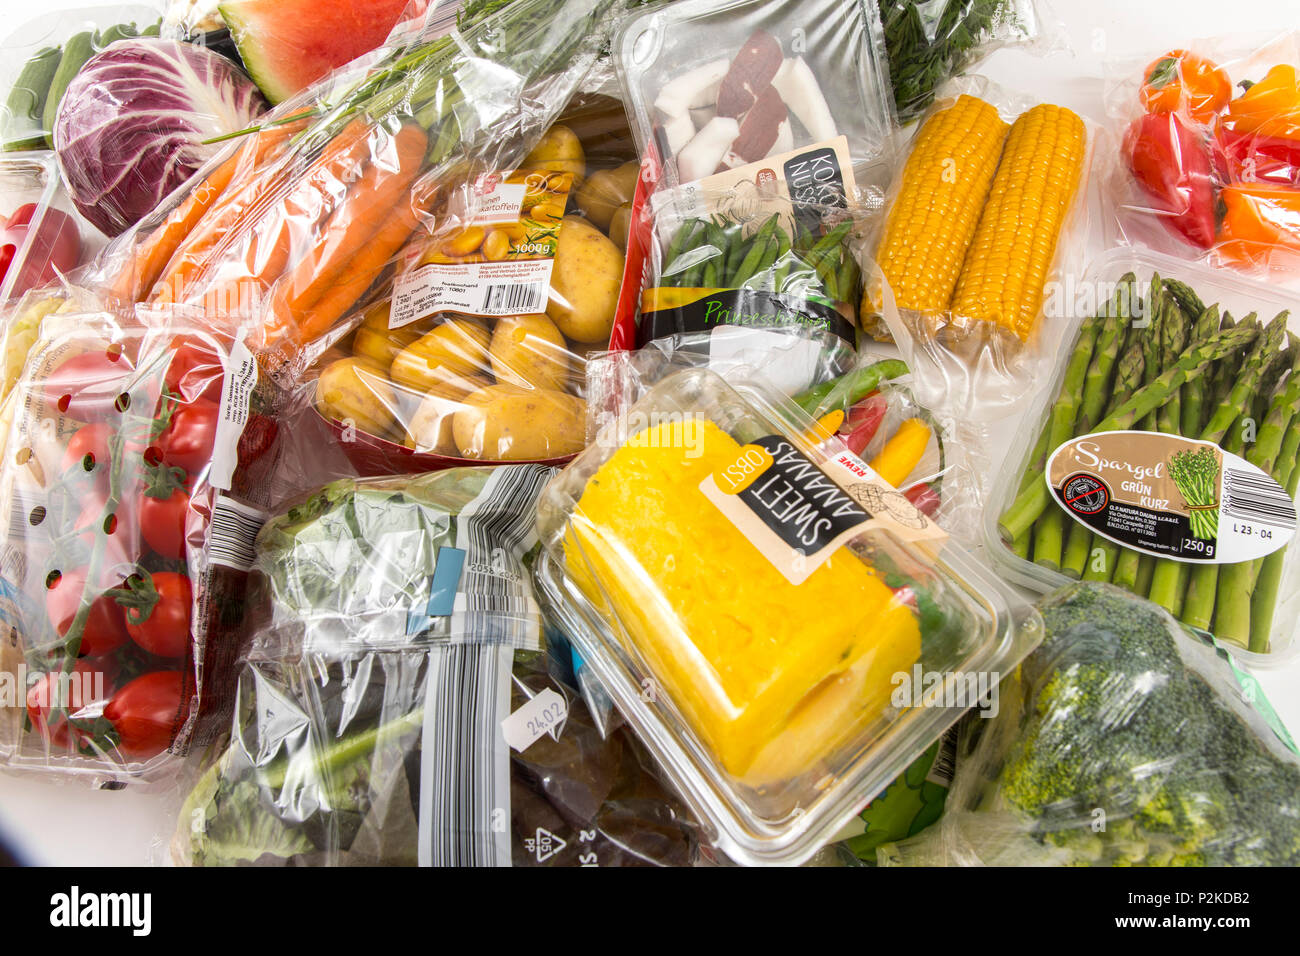 https://c8.alamy.com/comp/P2KDB2/fresh-food-vegetables-fruit-each-individually-packaged-in-plastic-wrap-all-food-is-available-in-the-same-supermarket-even-without-plastic-packagin-P2KDB2.jpg